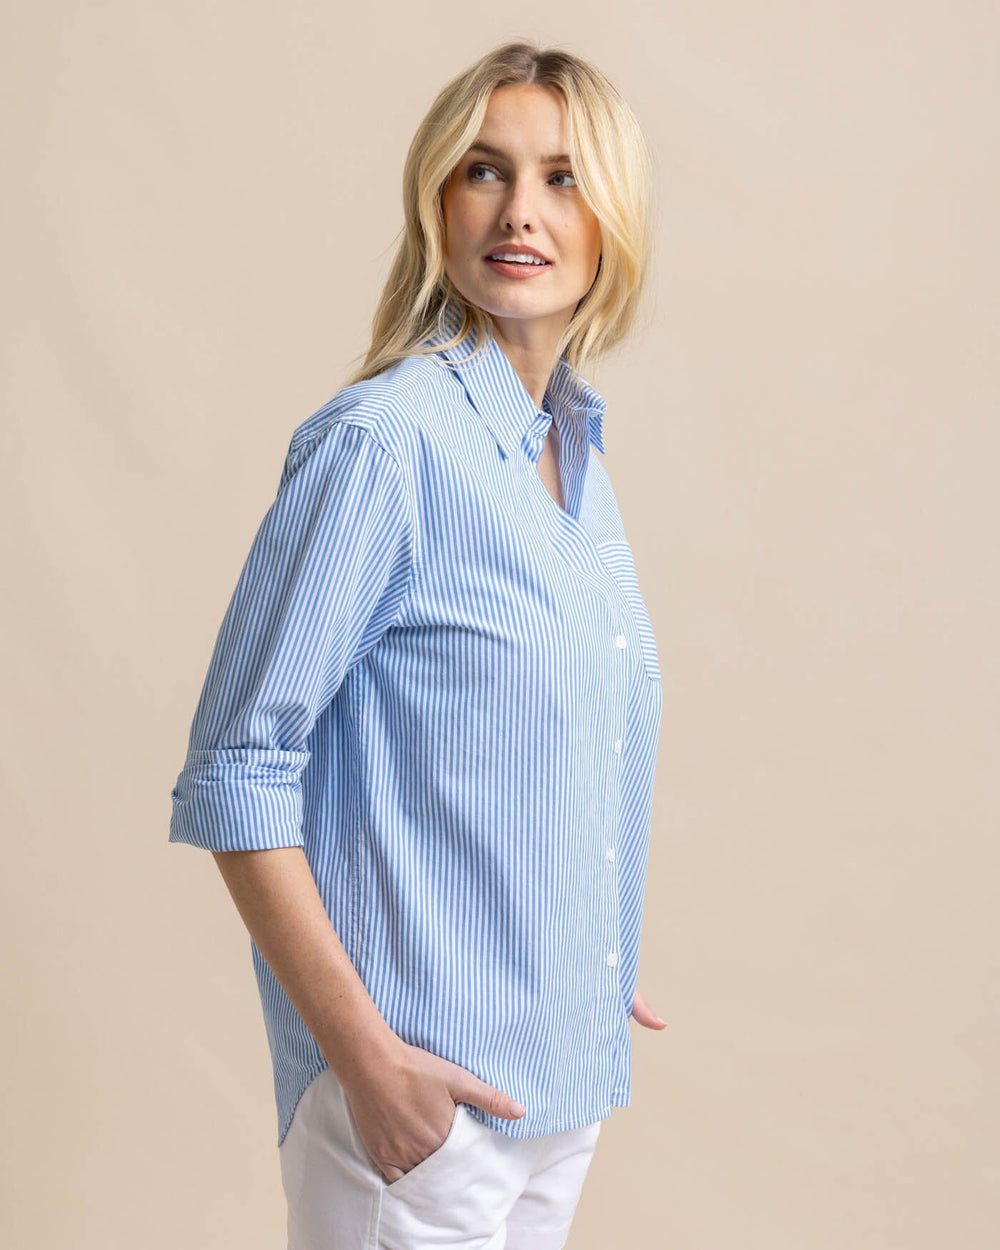 The front view of the Southern Tide Katherine Stripe Shirt by Southern Tide - Blue Fin